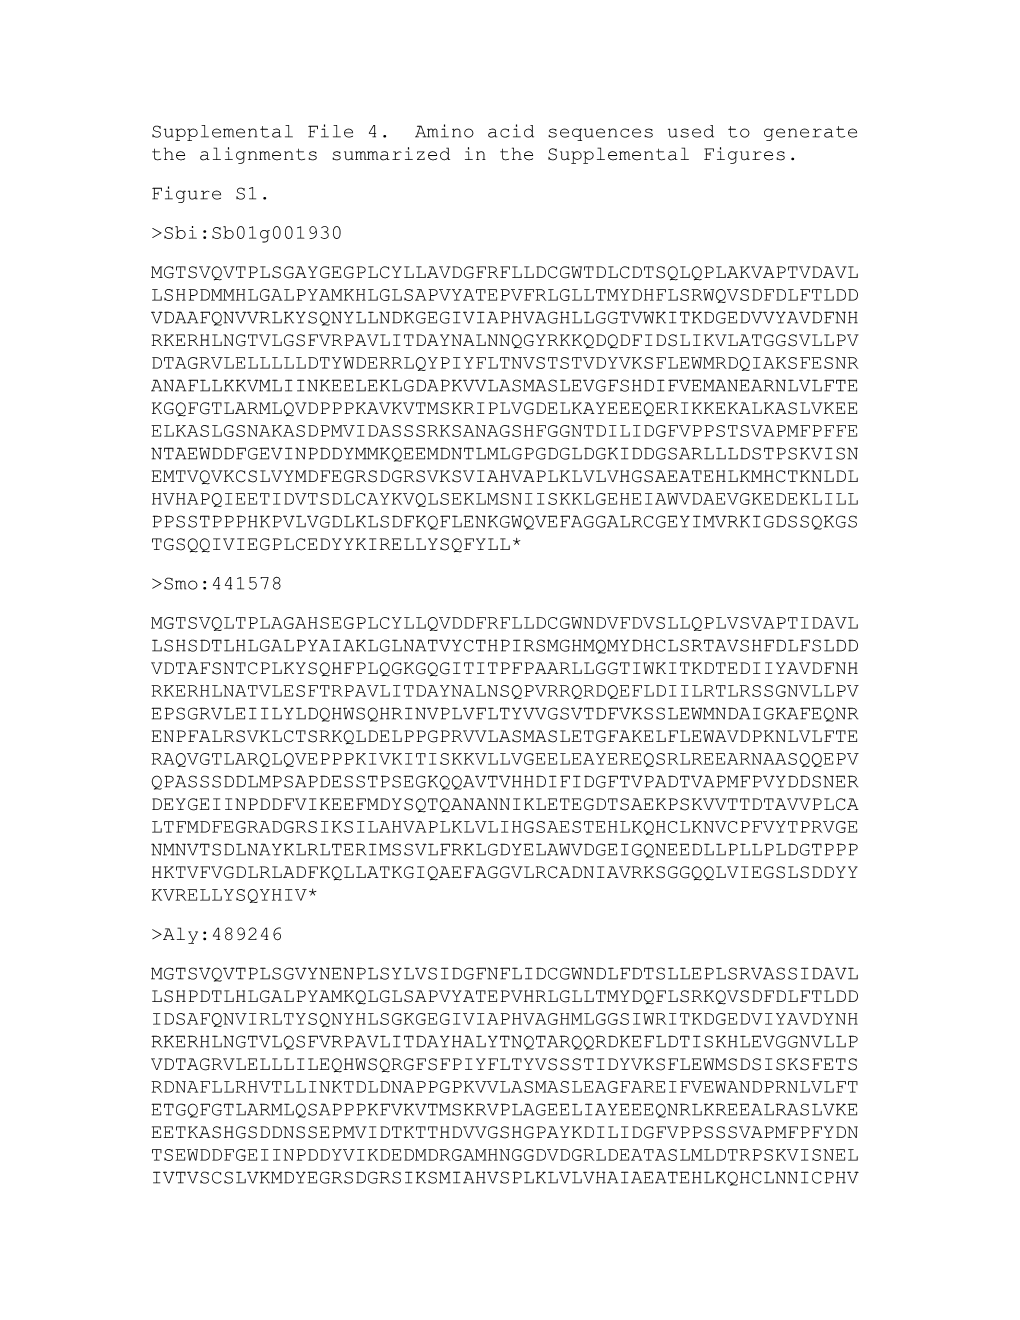 Supplemental File 4. Amino Acid Sequences Used to Generate the Alignments Summarized In